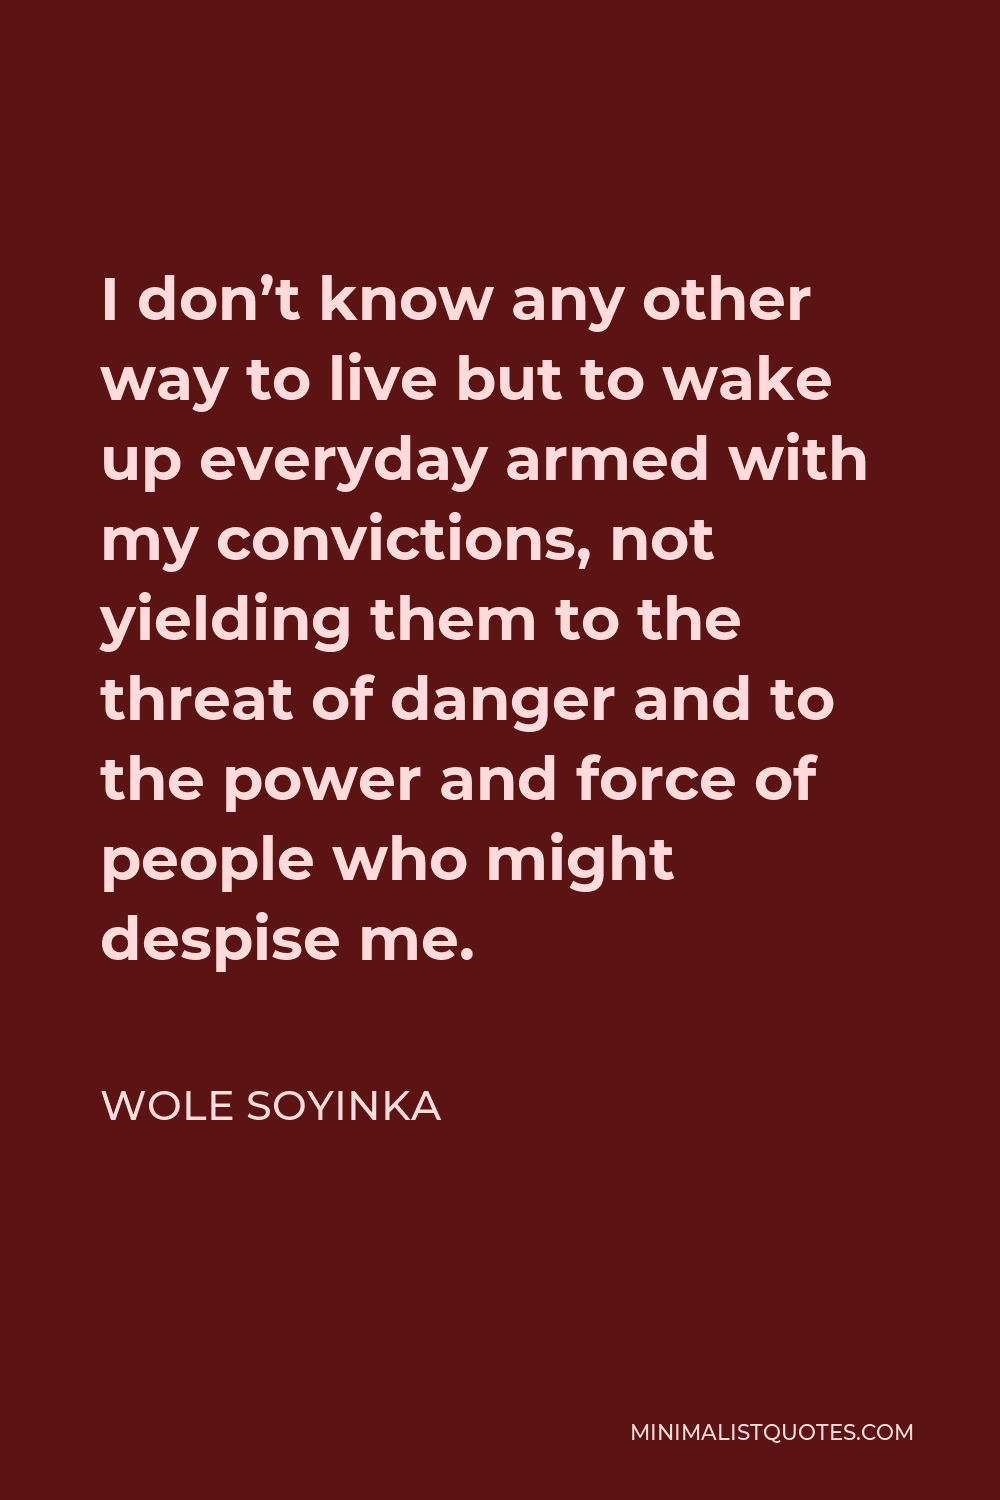 Wole Soyinka Quote - I don’t know any other way to live but to wake up everyday armed with my convictions, not yielding them to the threat of danger and to the power and force of people who might despise me.